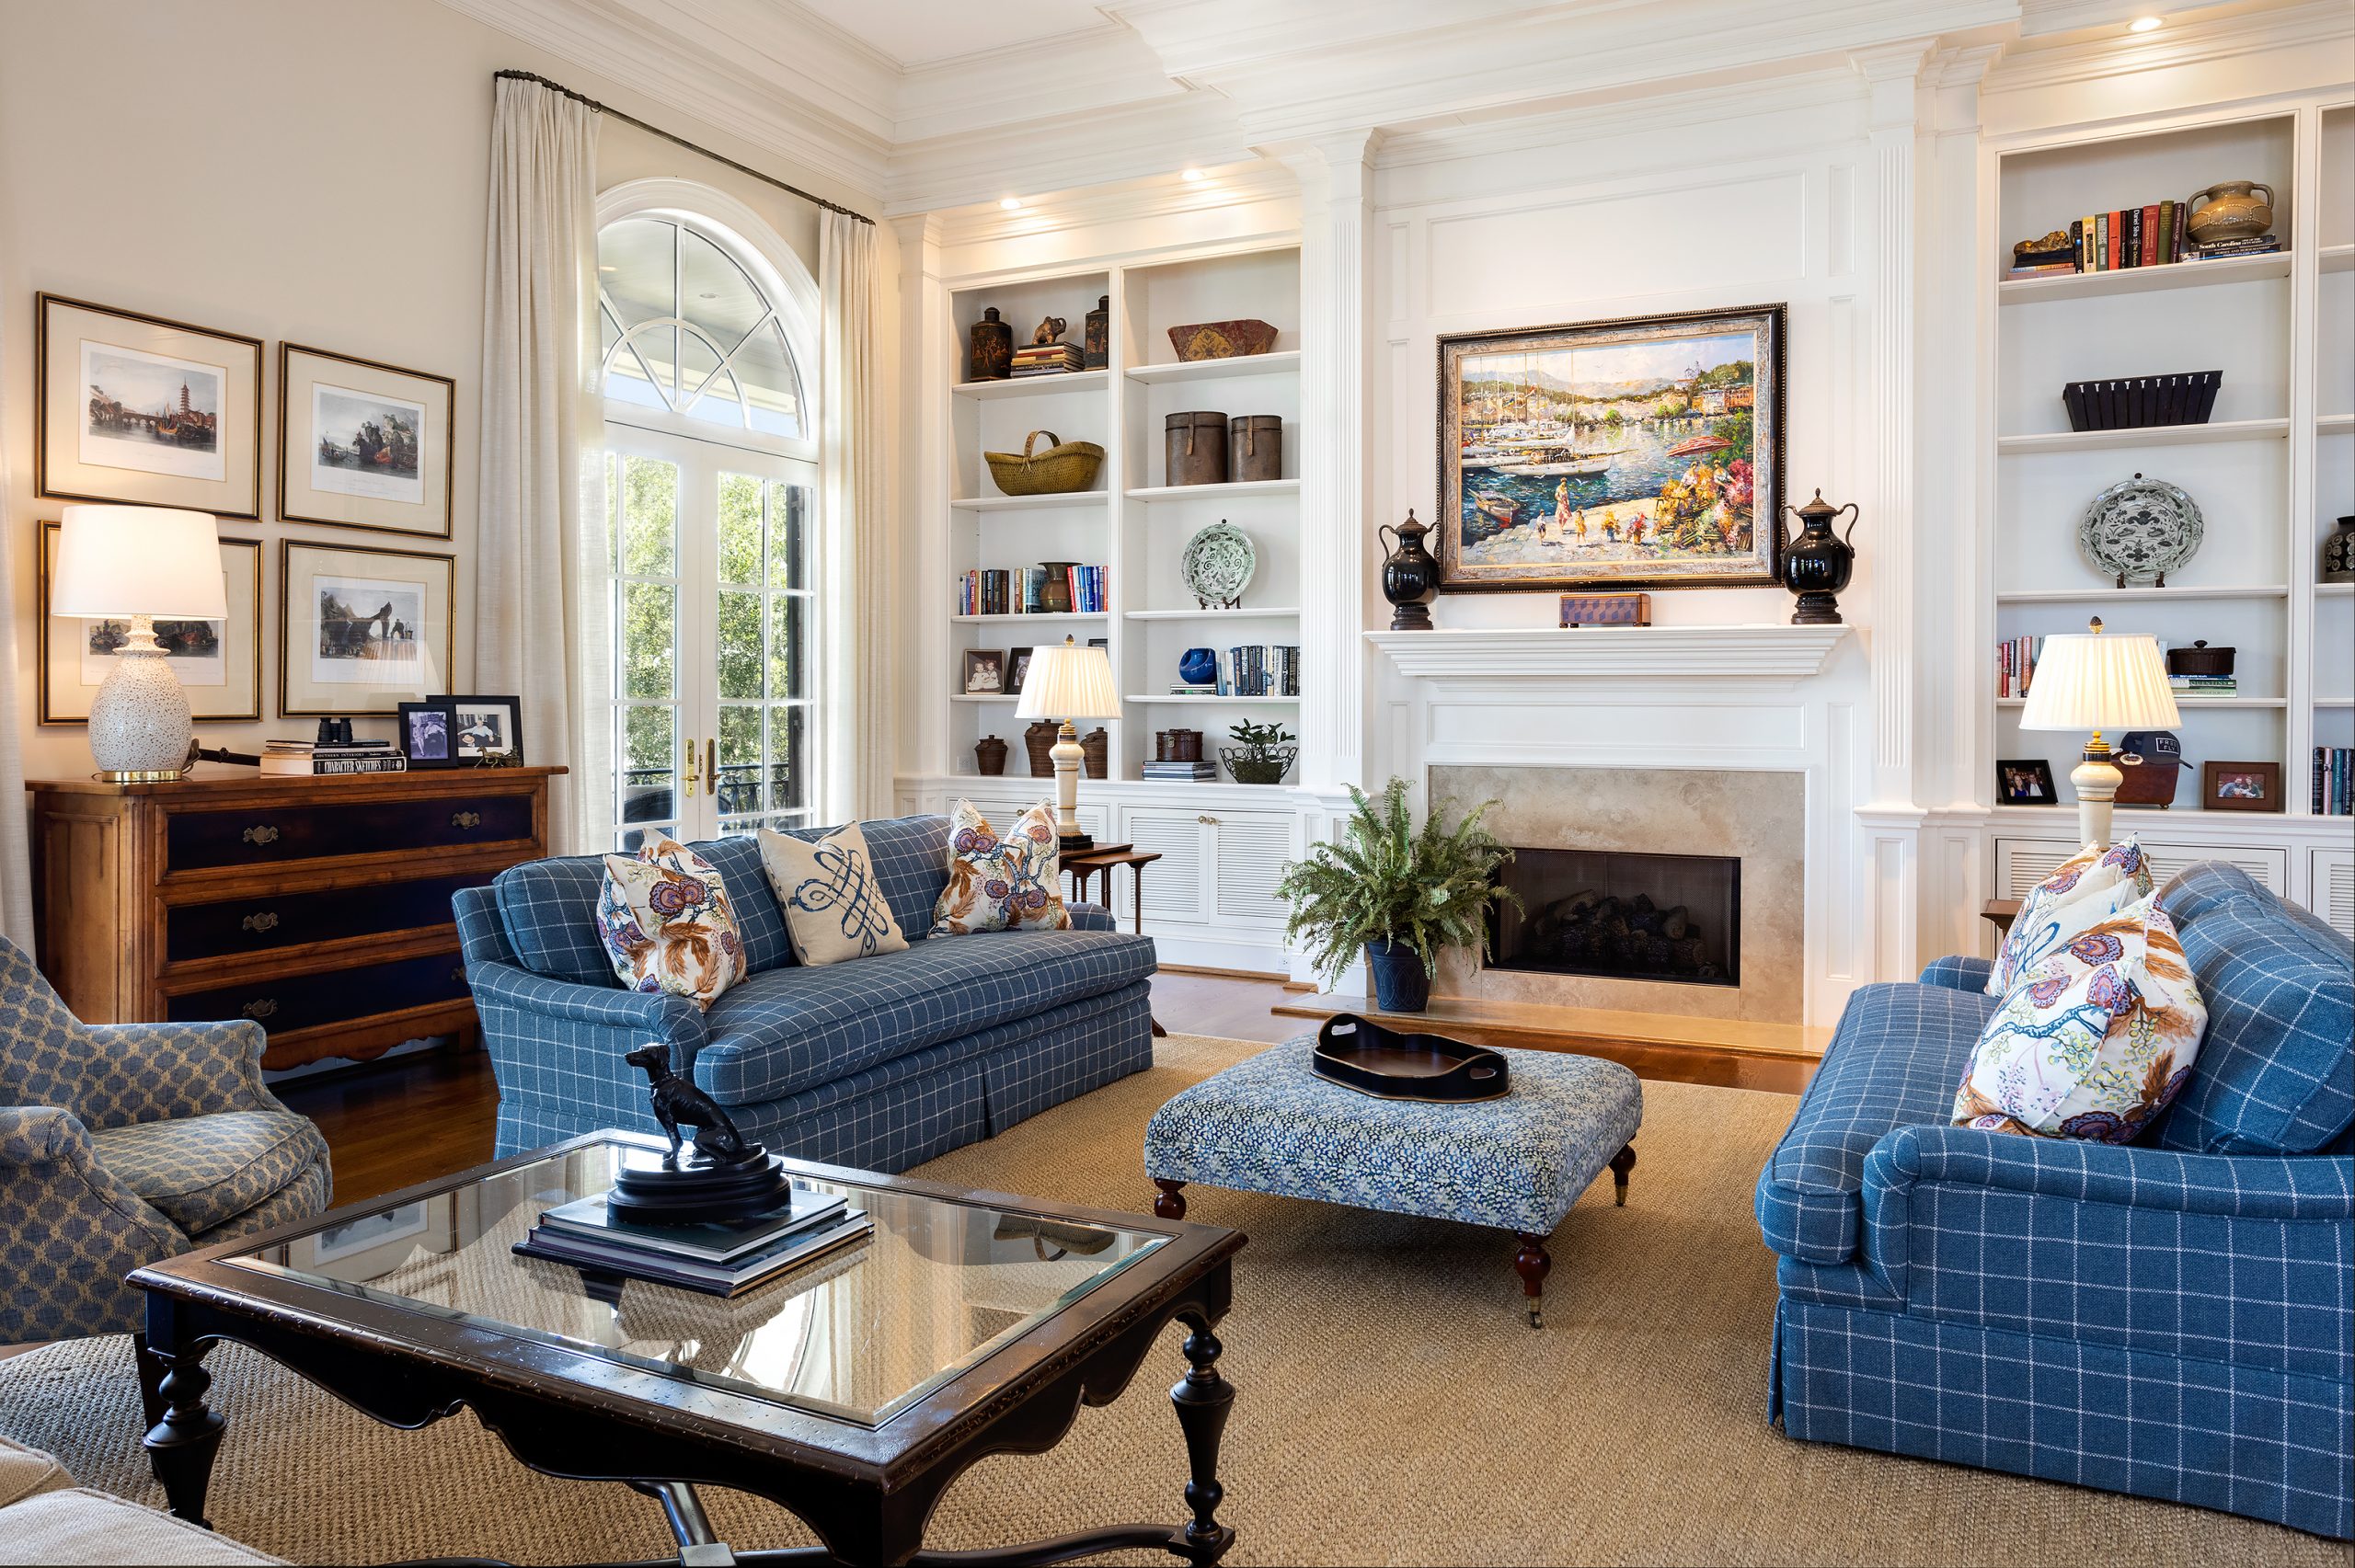 The family room, which shares the kitchen and breakfast area, is the heart of the home with comfortable seating gathered around a fireplace. Everything in the home can be operated by phone or tablets — including managing the lights, alarm, and music, and raising the painting above the fireplace to reveal a hidden television! 